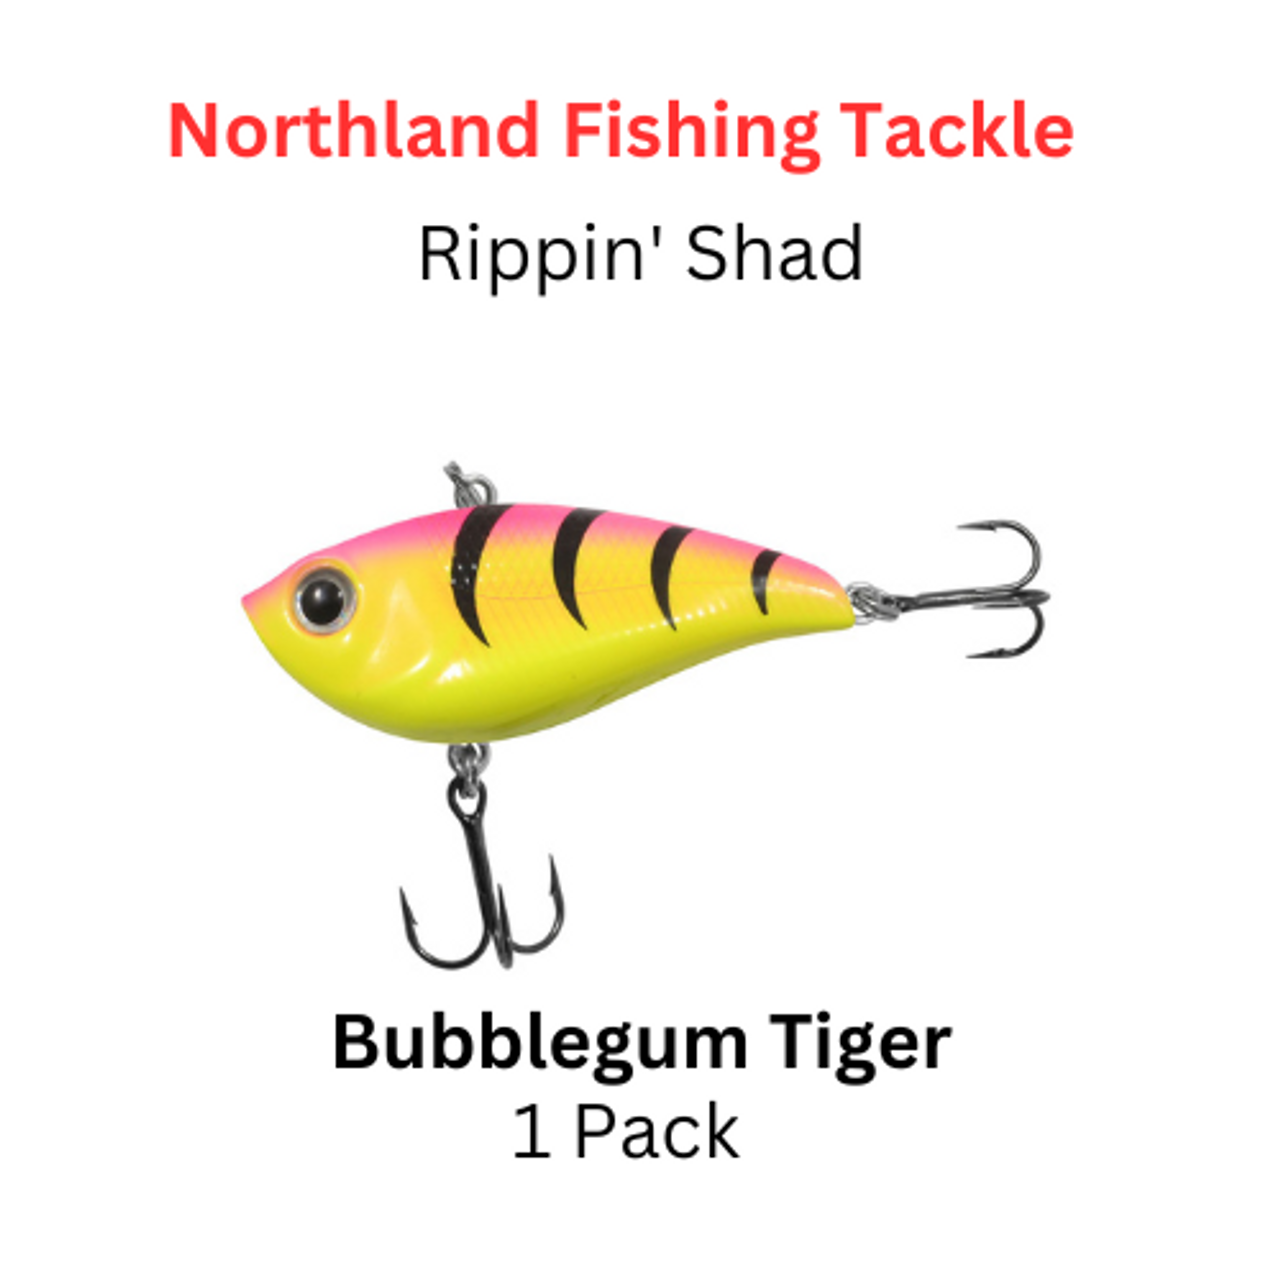 https://cdn11.bigcommerce.com/s-u9nbd/images/stencil/1280x1280/products/6272/15832/Northland_Fishing_Tackle_Rippin_Shad_Bubblegum_Tiger__31761.1676903224.png?c=2?imbypass=on